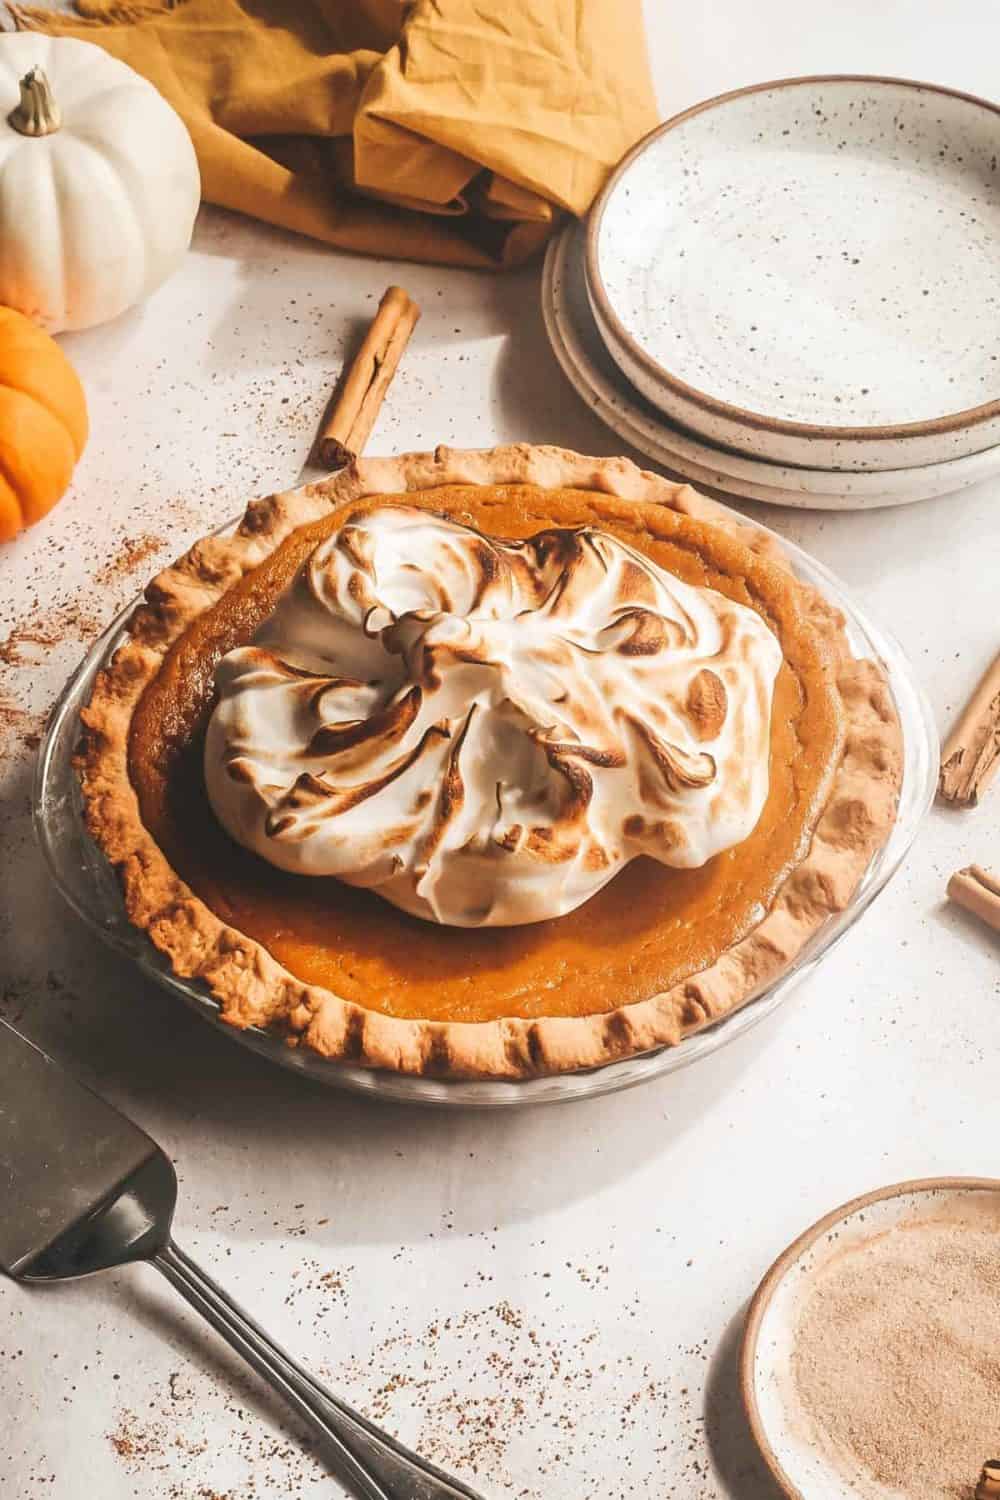 Sage Browned Butter Pumpkin Pie with Spiced Meringue